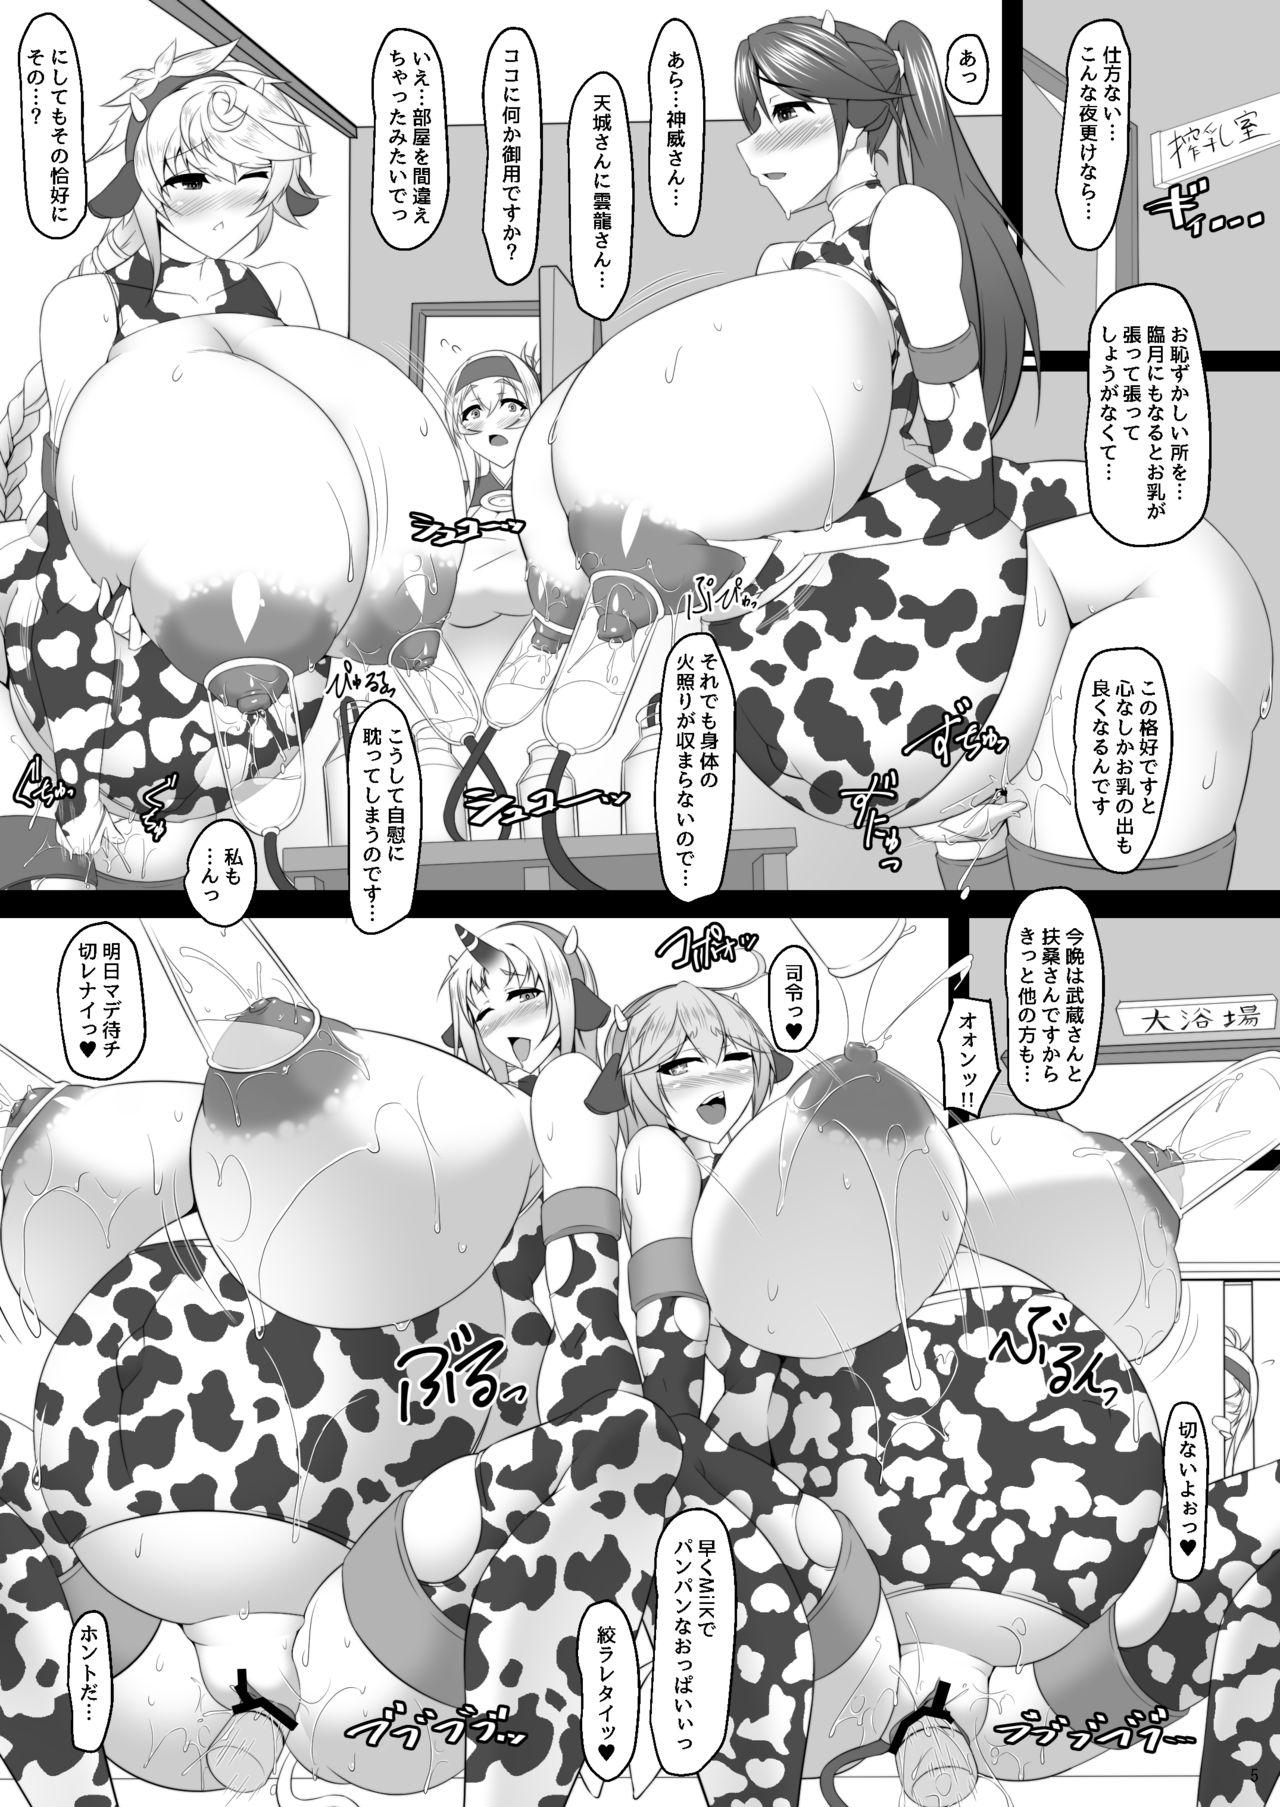 Pau Bote Colle 6 - Kantai collection All Natural - Page 5